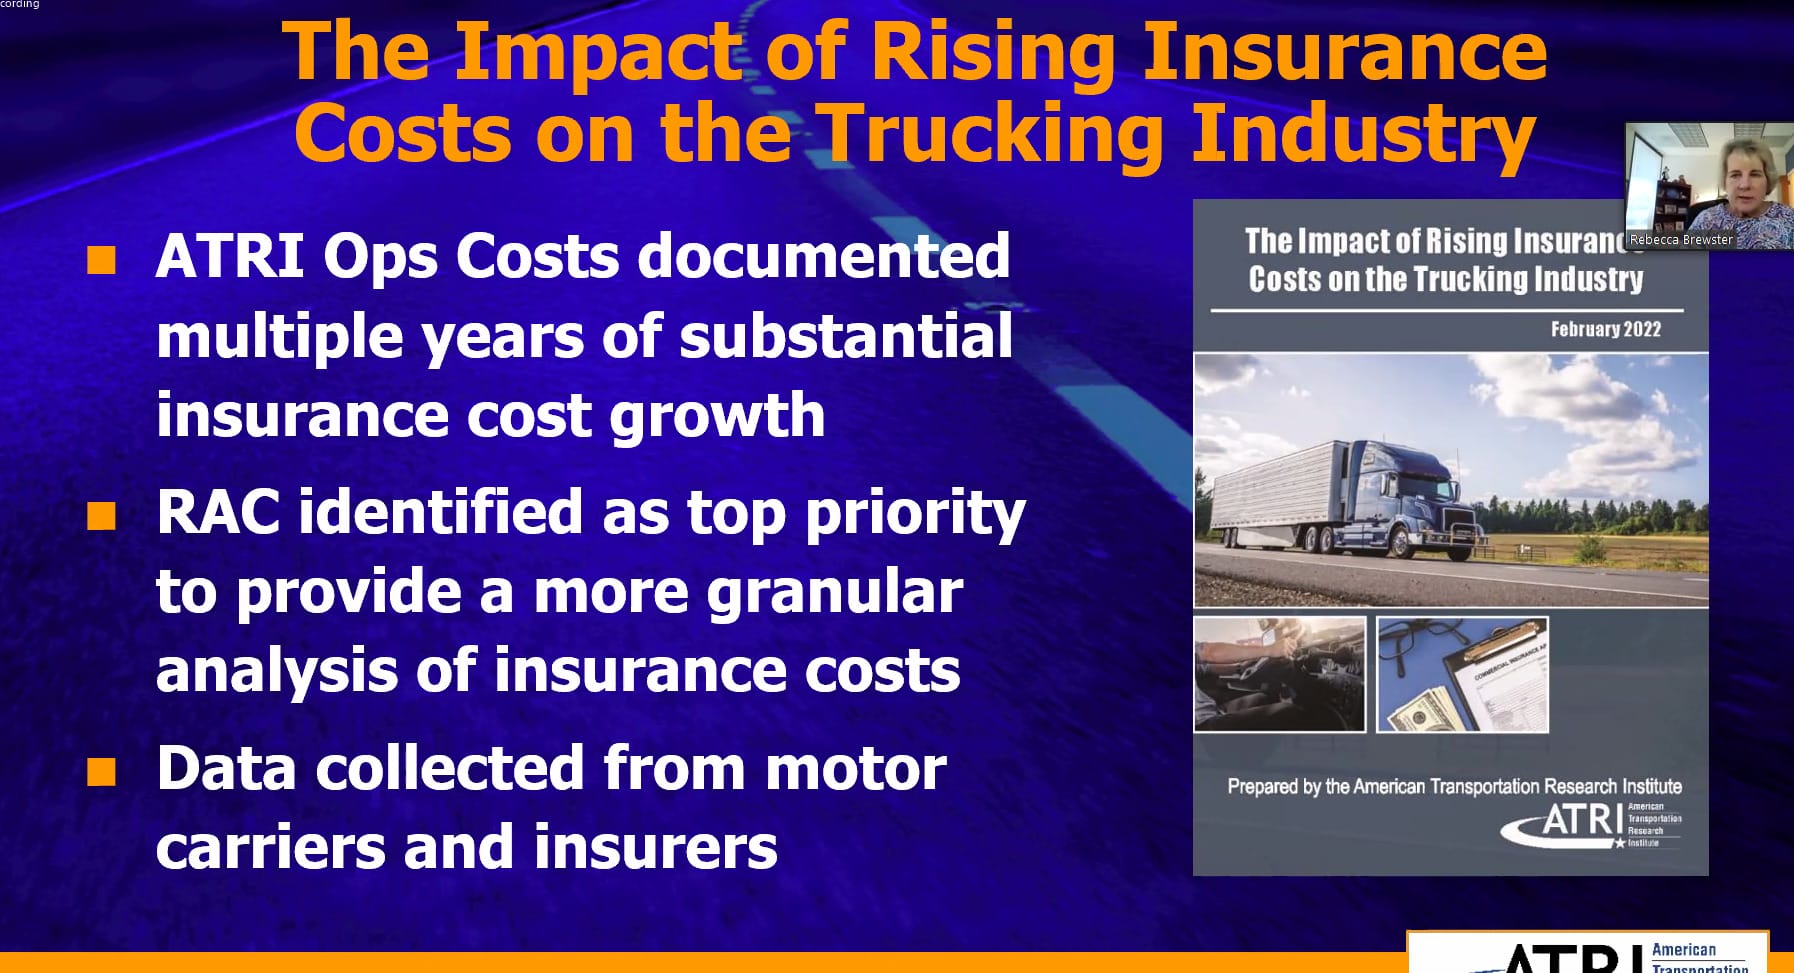 2023 - Insurance costs